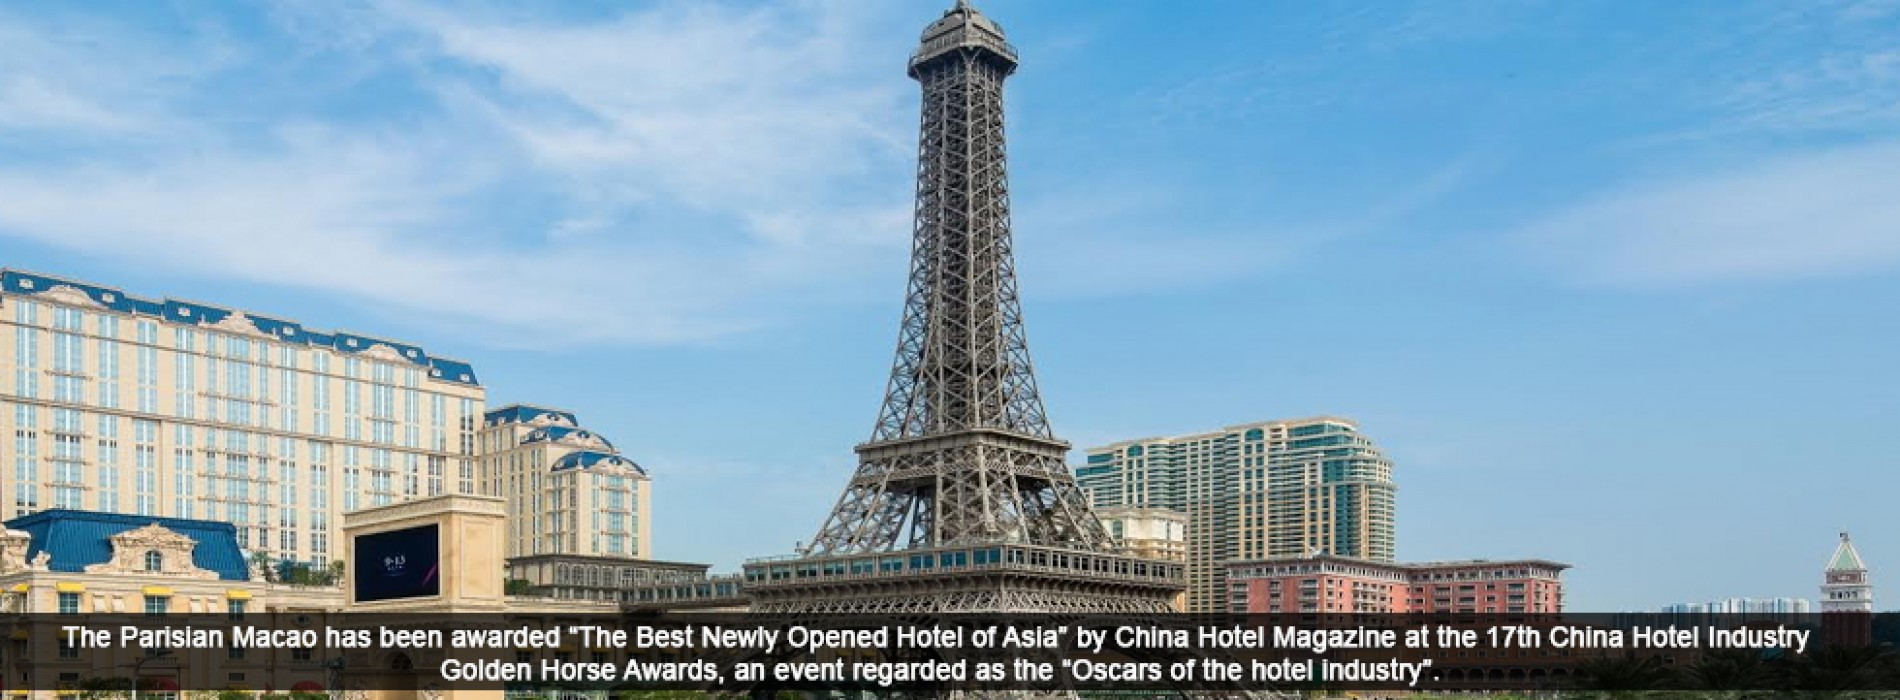 The Parisian Macao wins top title at Prestigious China Hotel Industry Golden Horse Awards